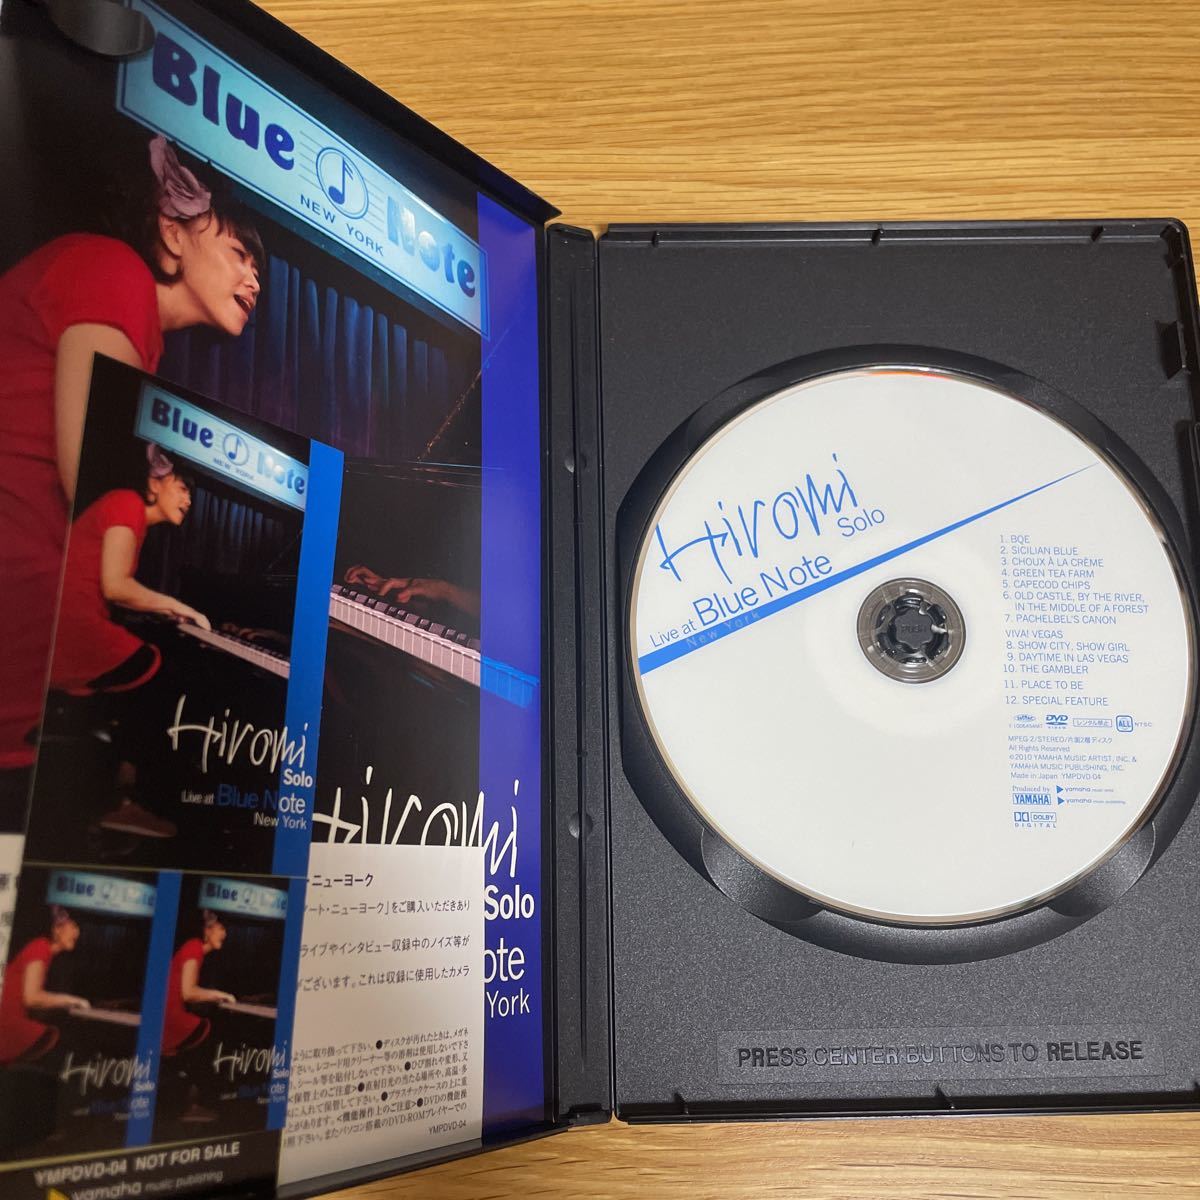 ■ DVD Hiromi Solo Live at Blue Note New York 上原ひろみ　ソロピアノ　YMPDVD-04 ライブ・アット・ブルーノート・ニューヨーク_画像5